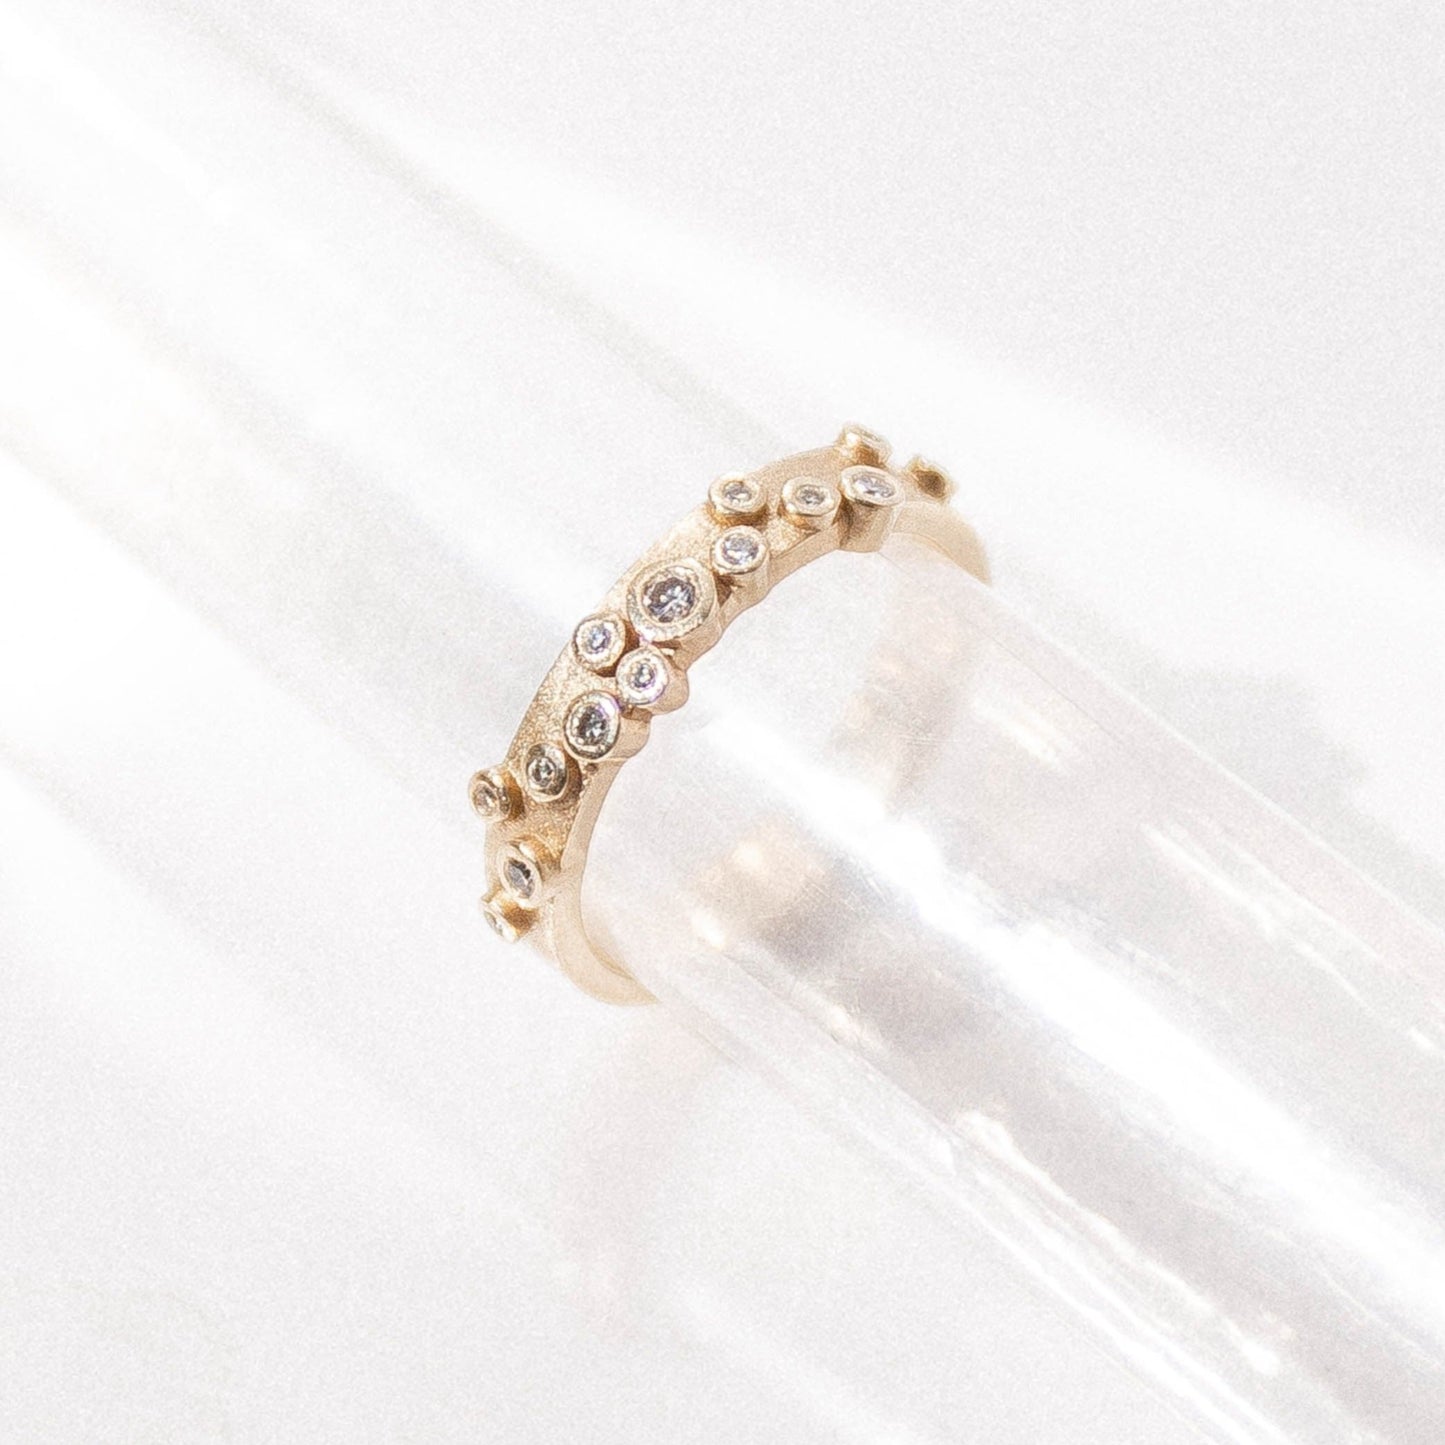 Constellation Ring in Solid 9ct Gold